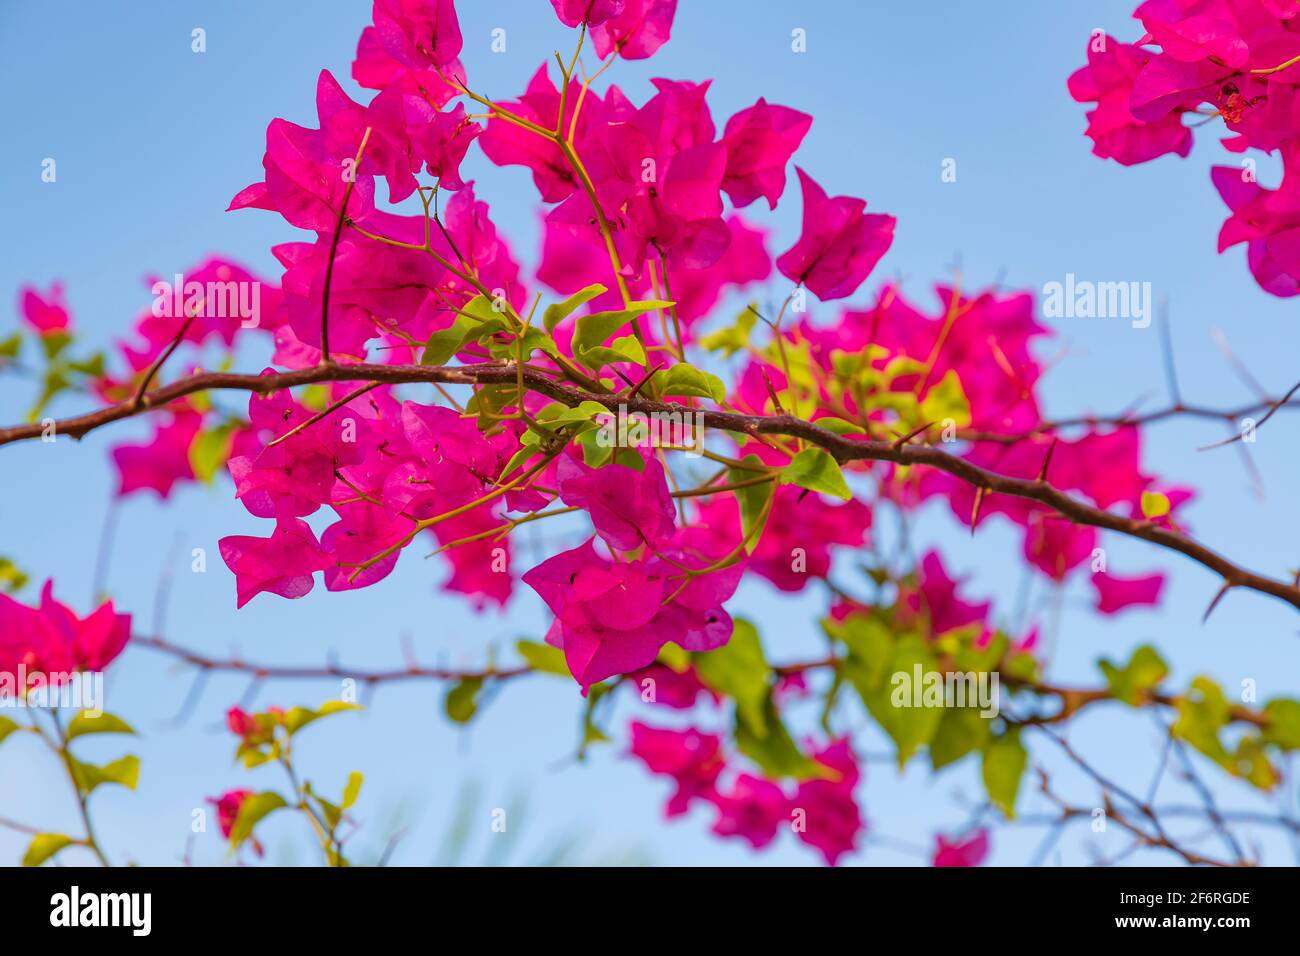 pink bougainvillea flowers with prickly stems Stock Photo